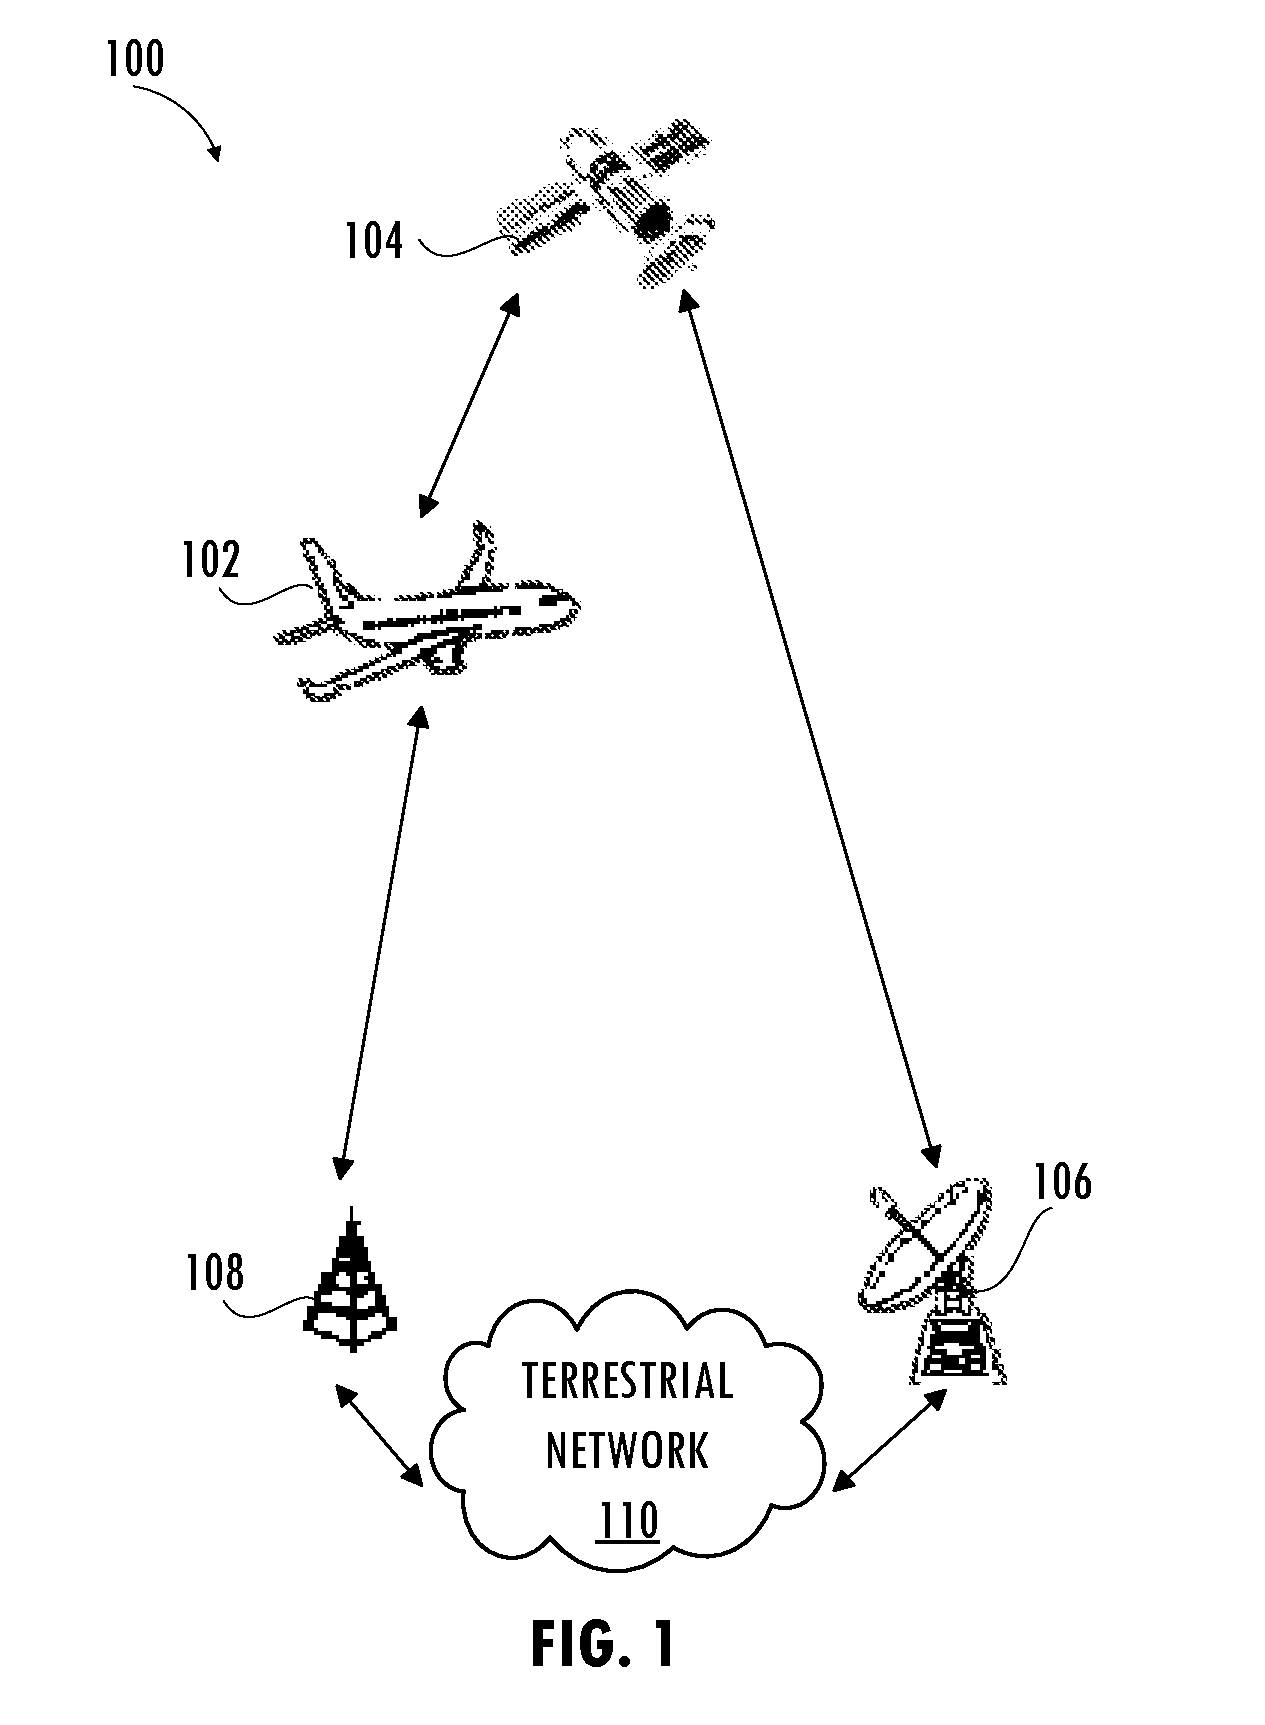 Techniques for In-Flight Connectivity